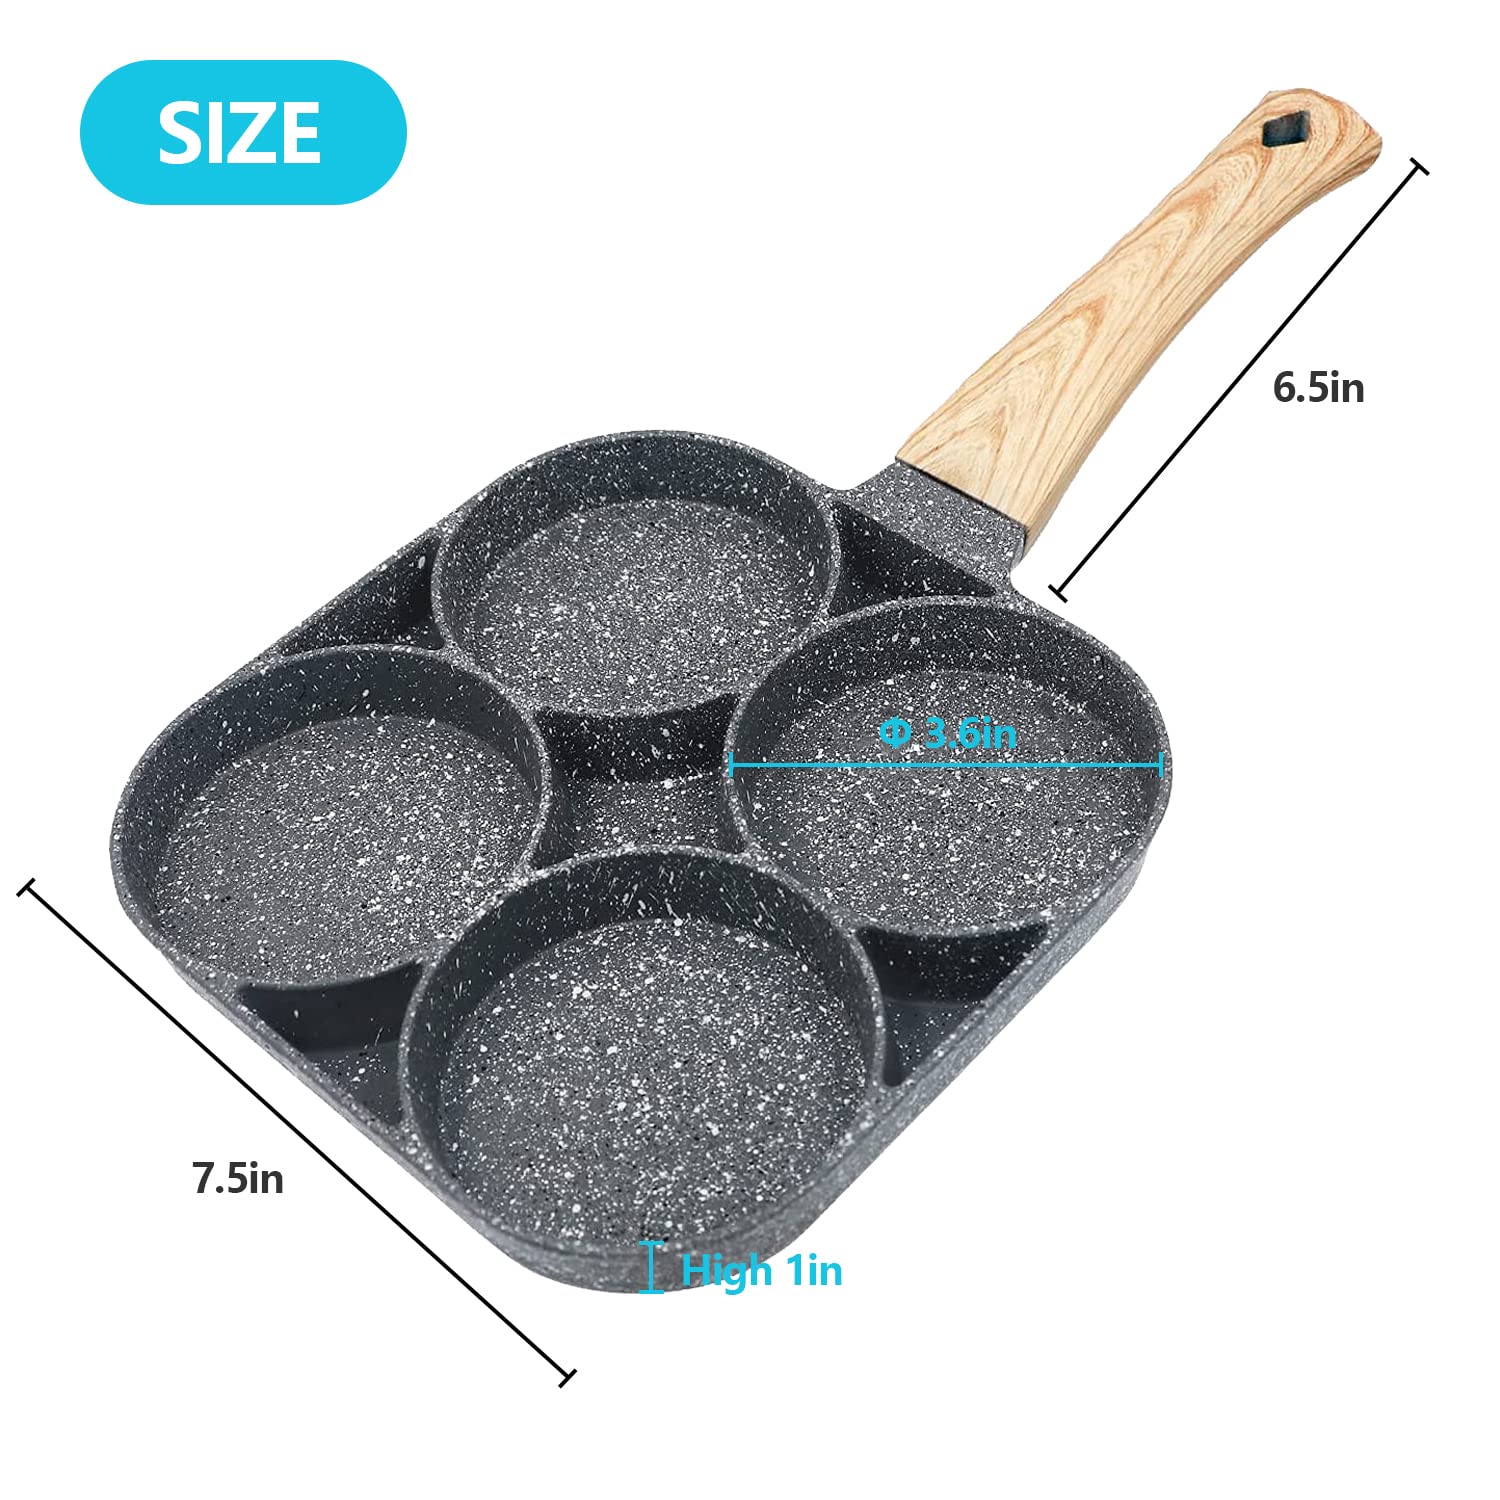 LMIP Egg Skillet, Omelette Pan Nonstick 4 Cup Pancake Pan, Gas and Induction Compatible for Burgers, Omelettes, Outdoor Camping 14.9"x7.3" (Black)